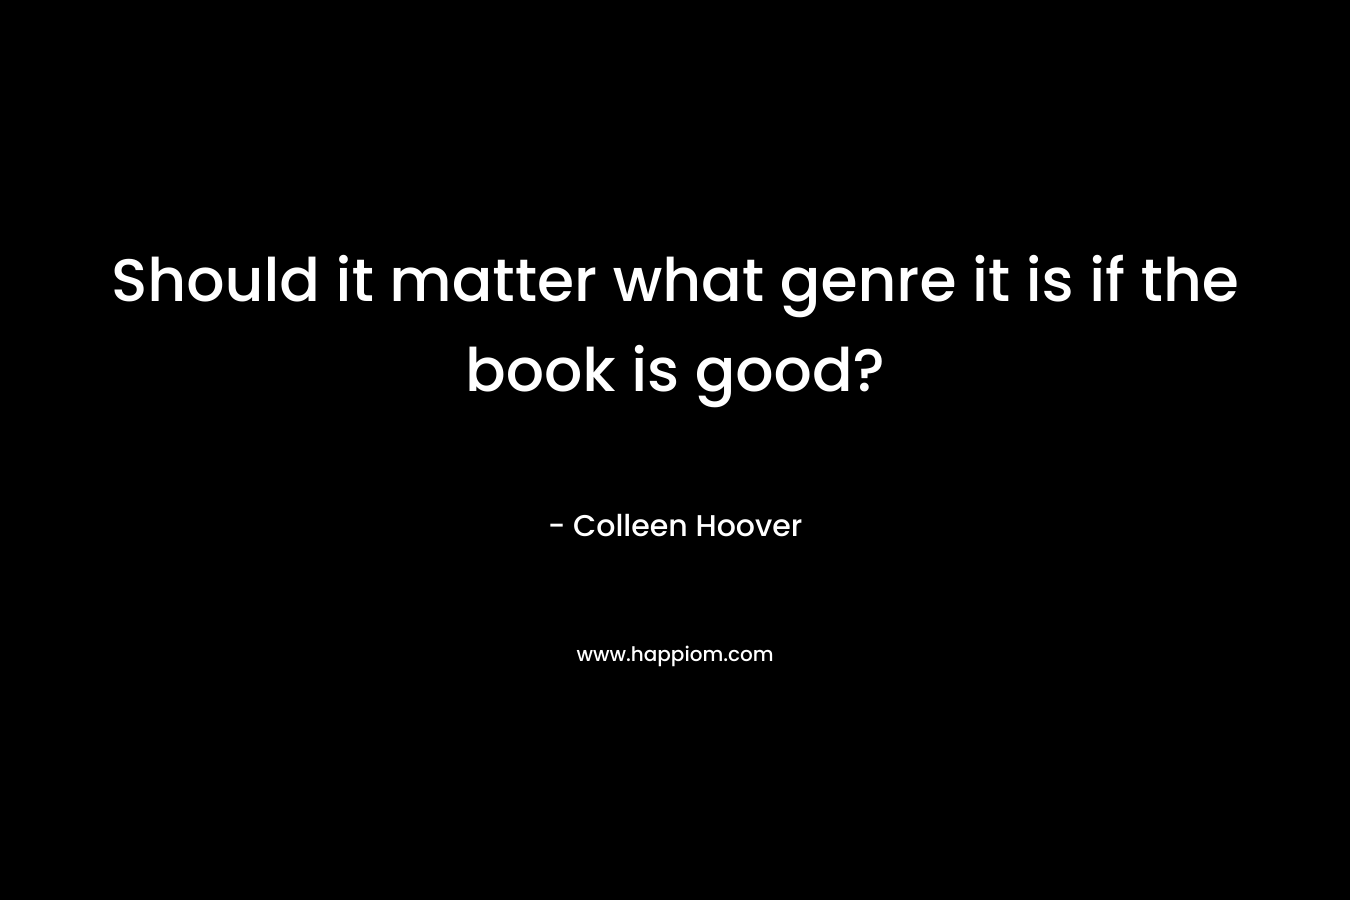 Should it matter what genre it is if the book is good?